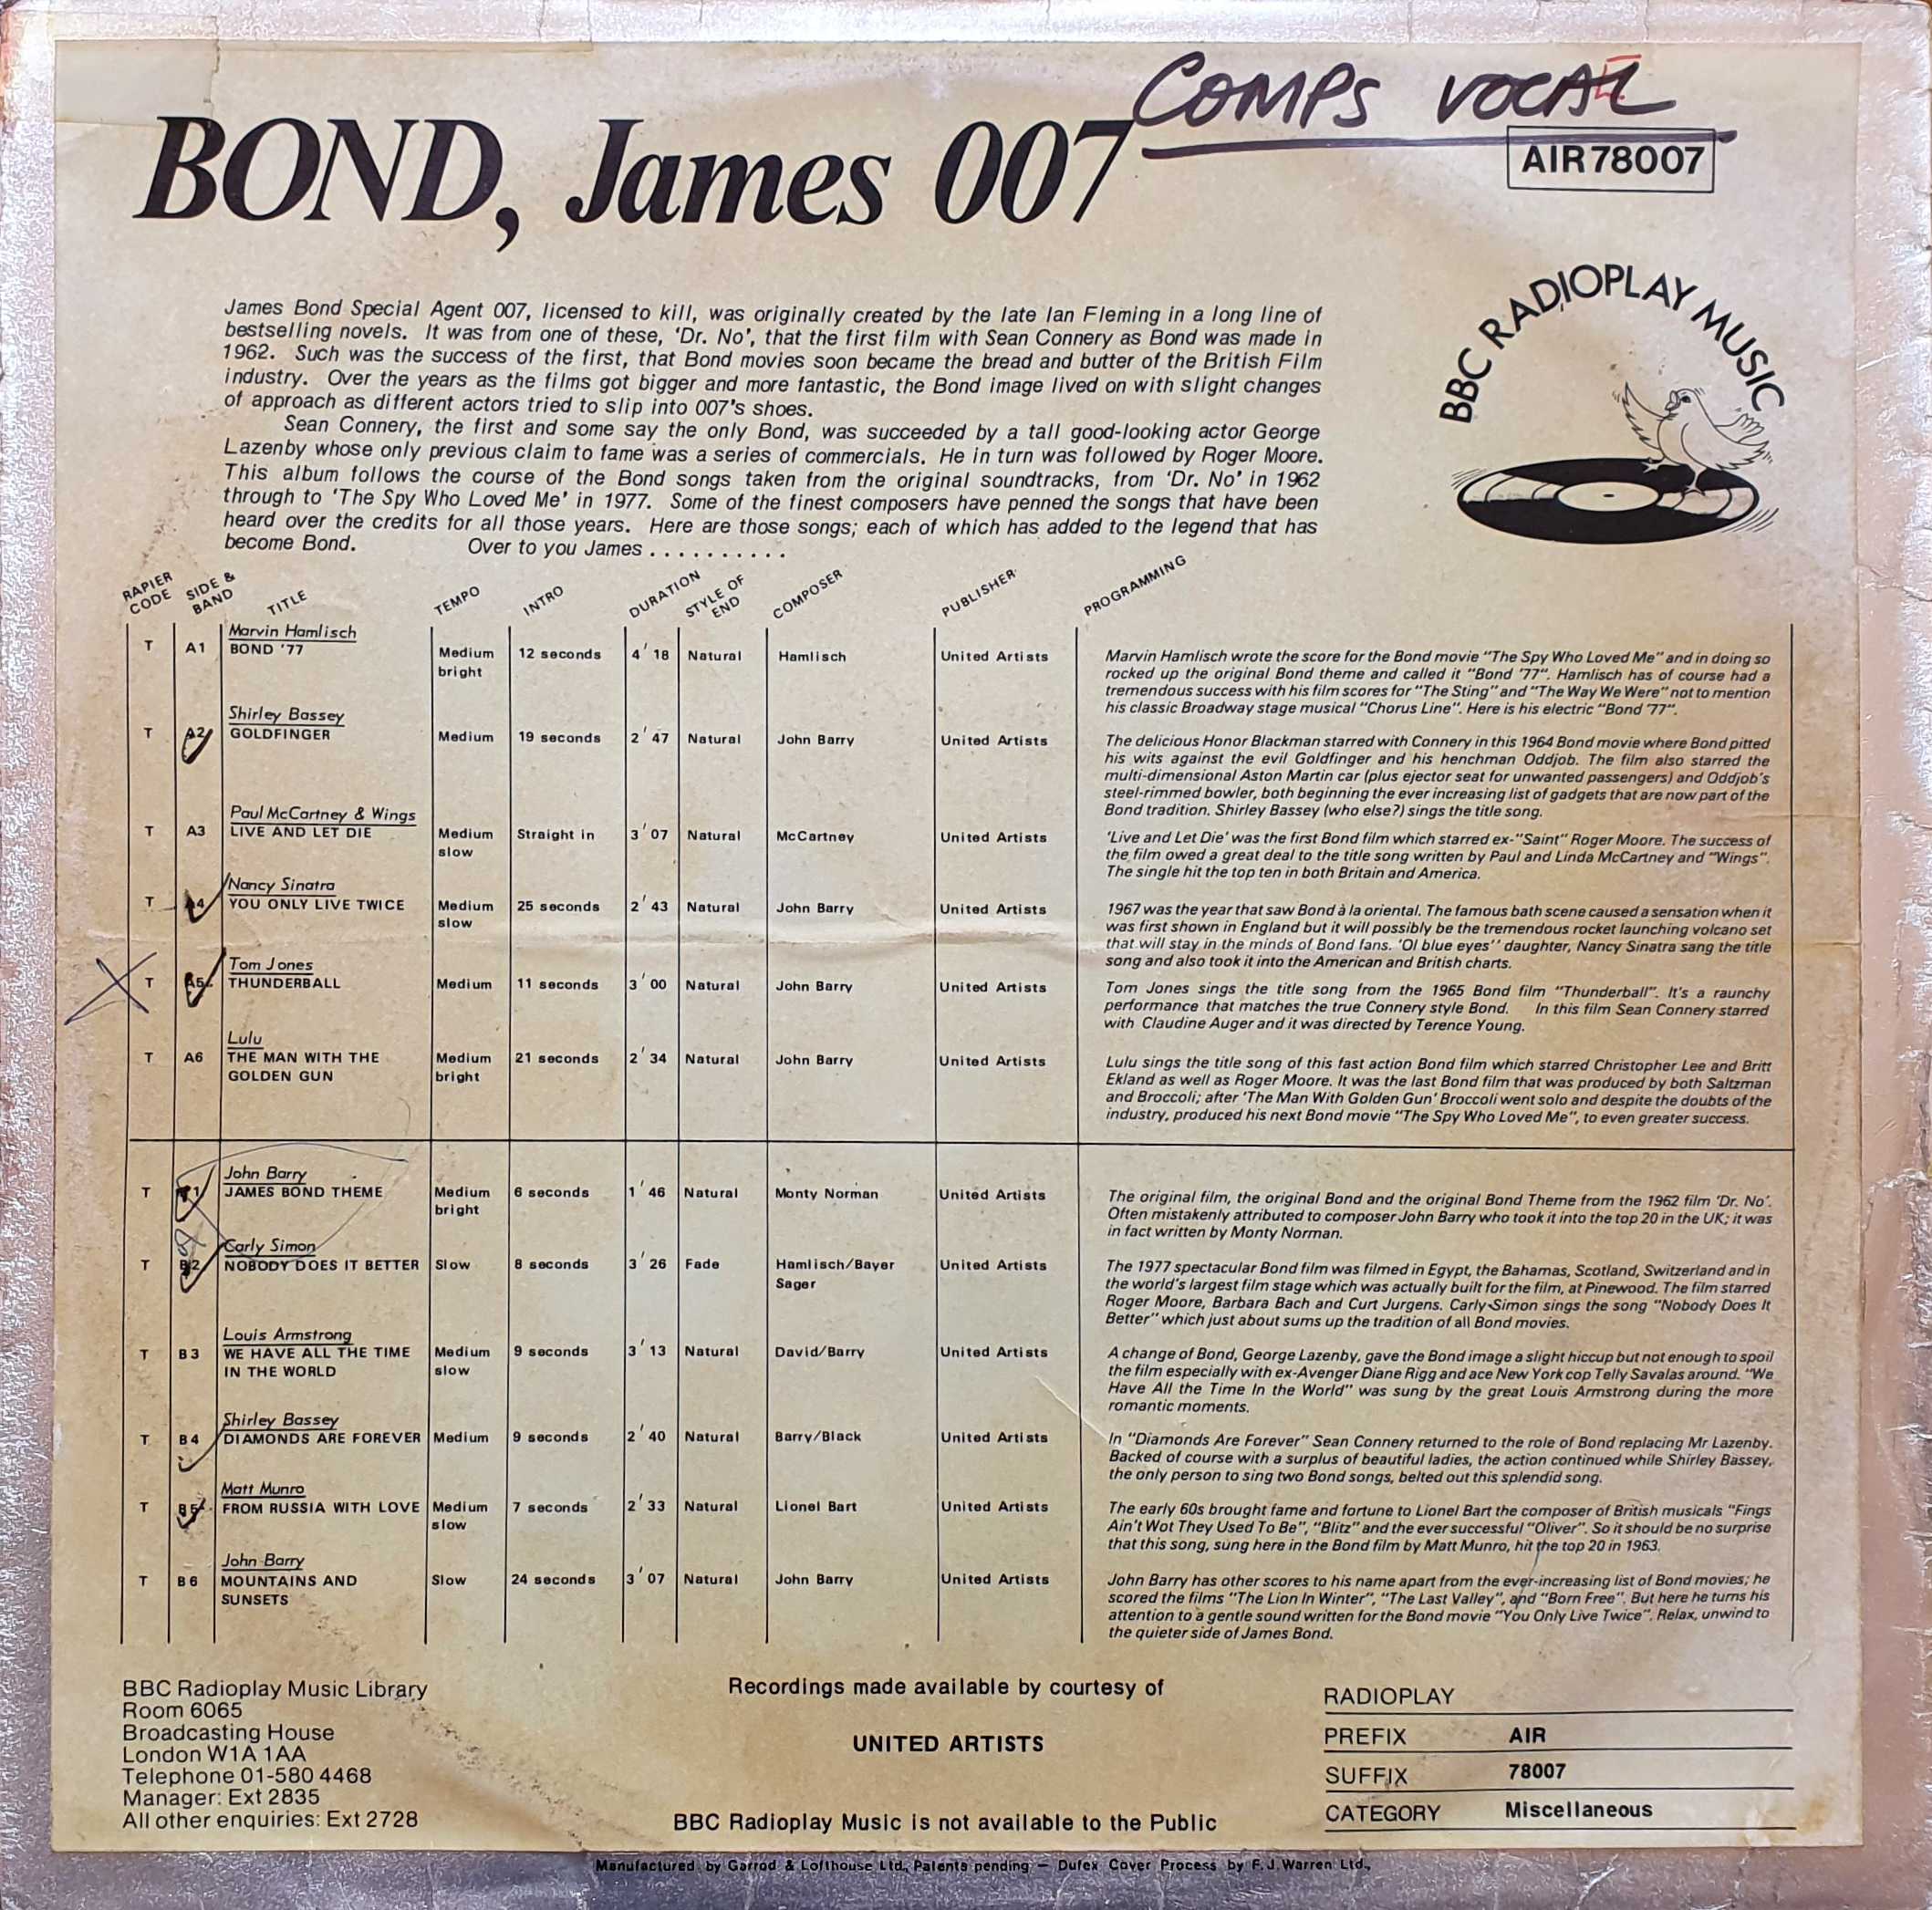 Picture of AIR 78007 Bond, James 007 by artist Various from the BBC records and Tapes library